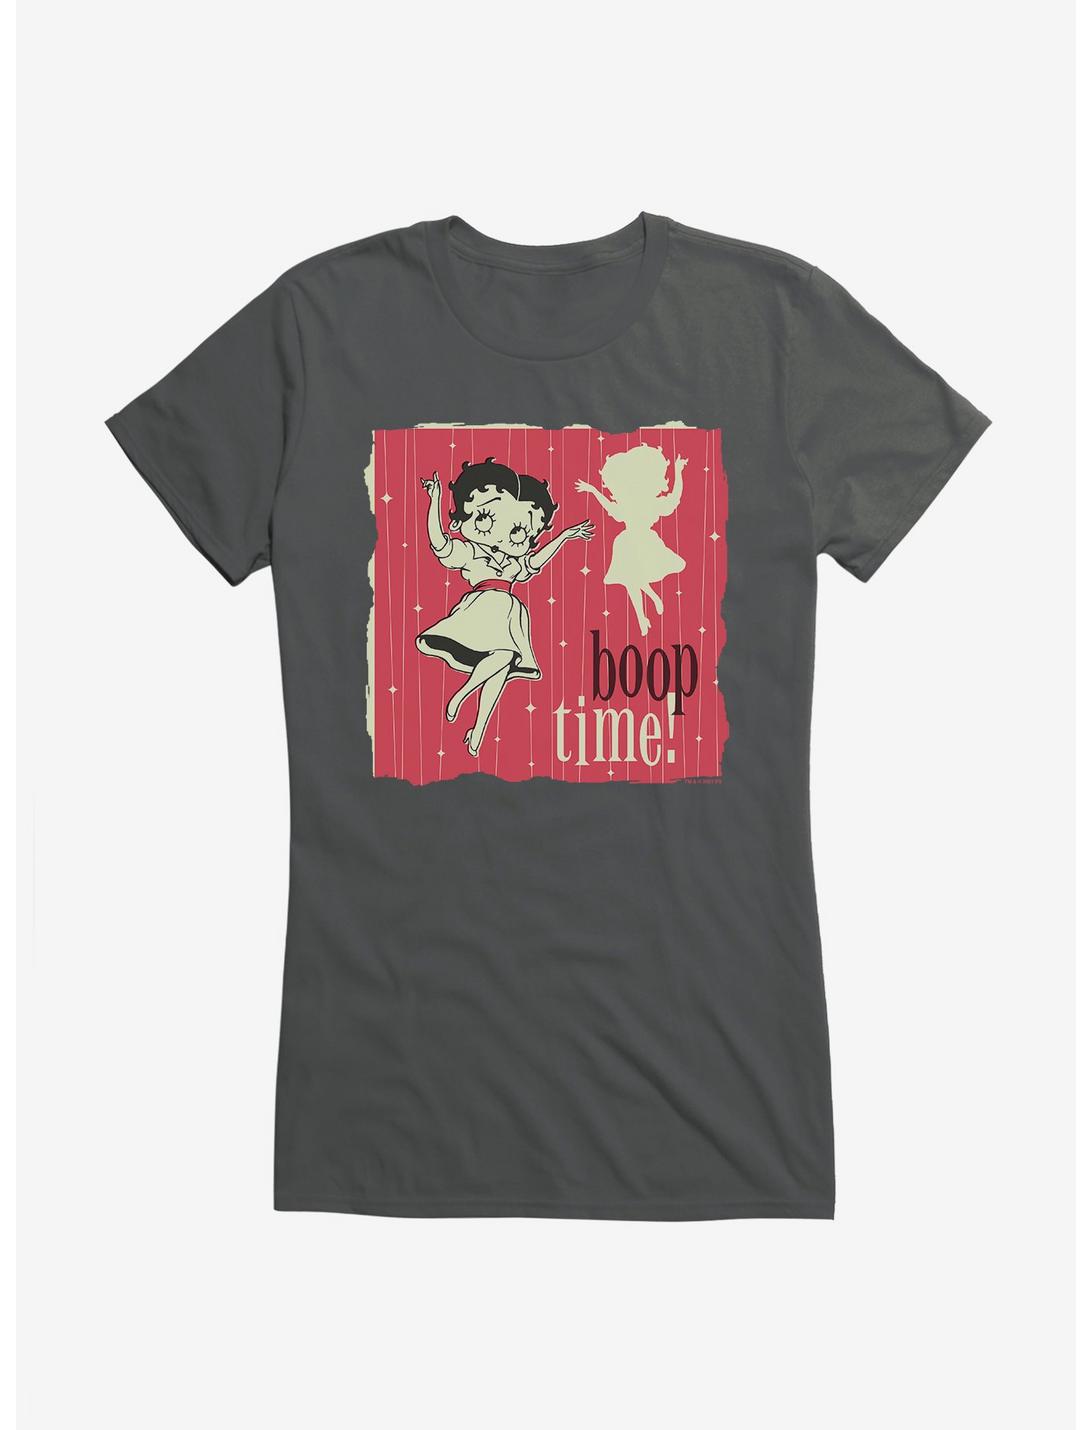 Betty Boop Time For A Boop Girls T-Shirt, , hi-res